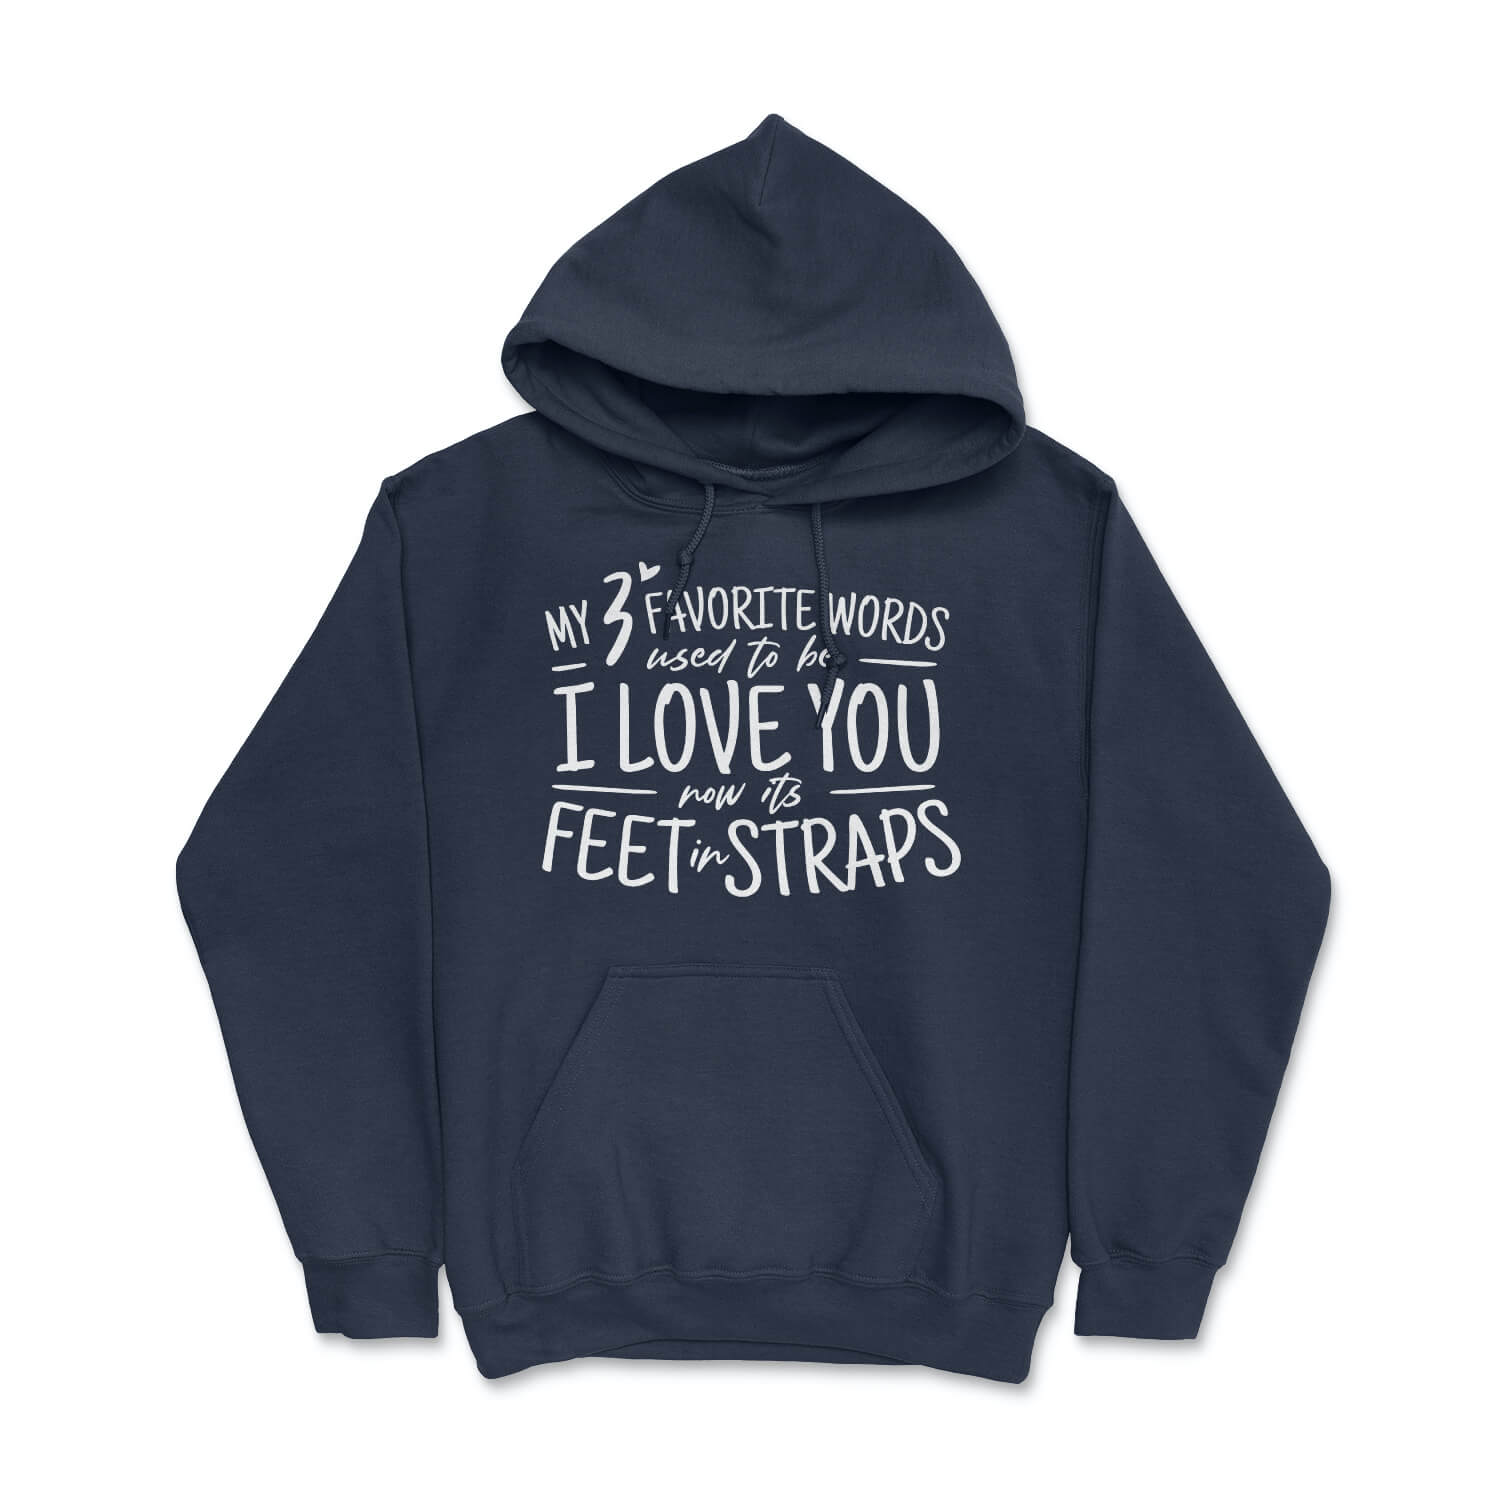 My 3 Favorite Words Used To Be I Love You Now It's Feet in Straps - Cozy Hooded Sweatshirt Skyba Hoodie